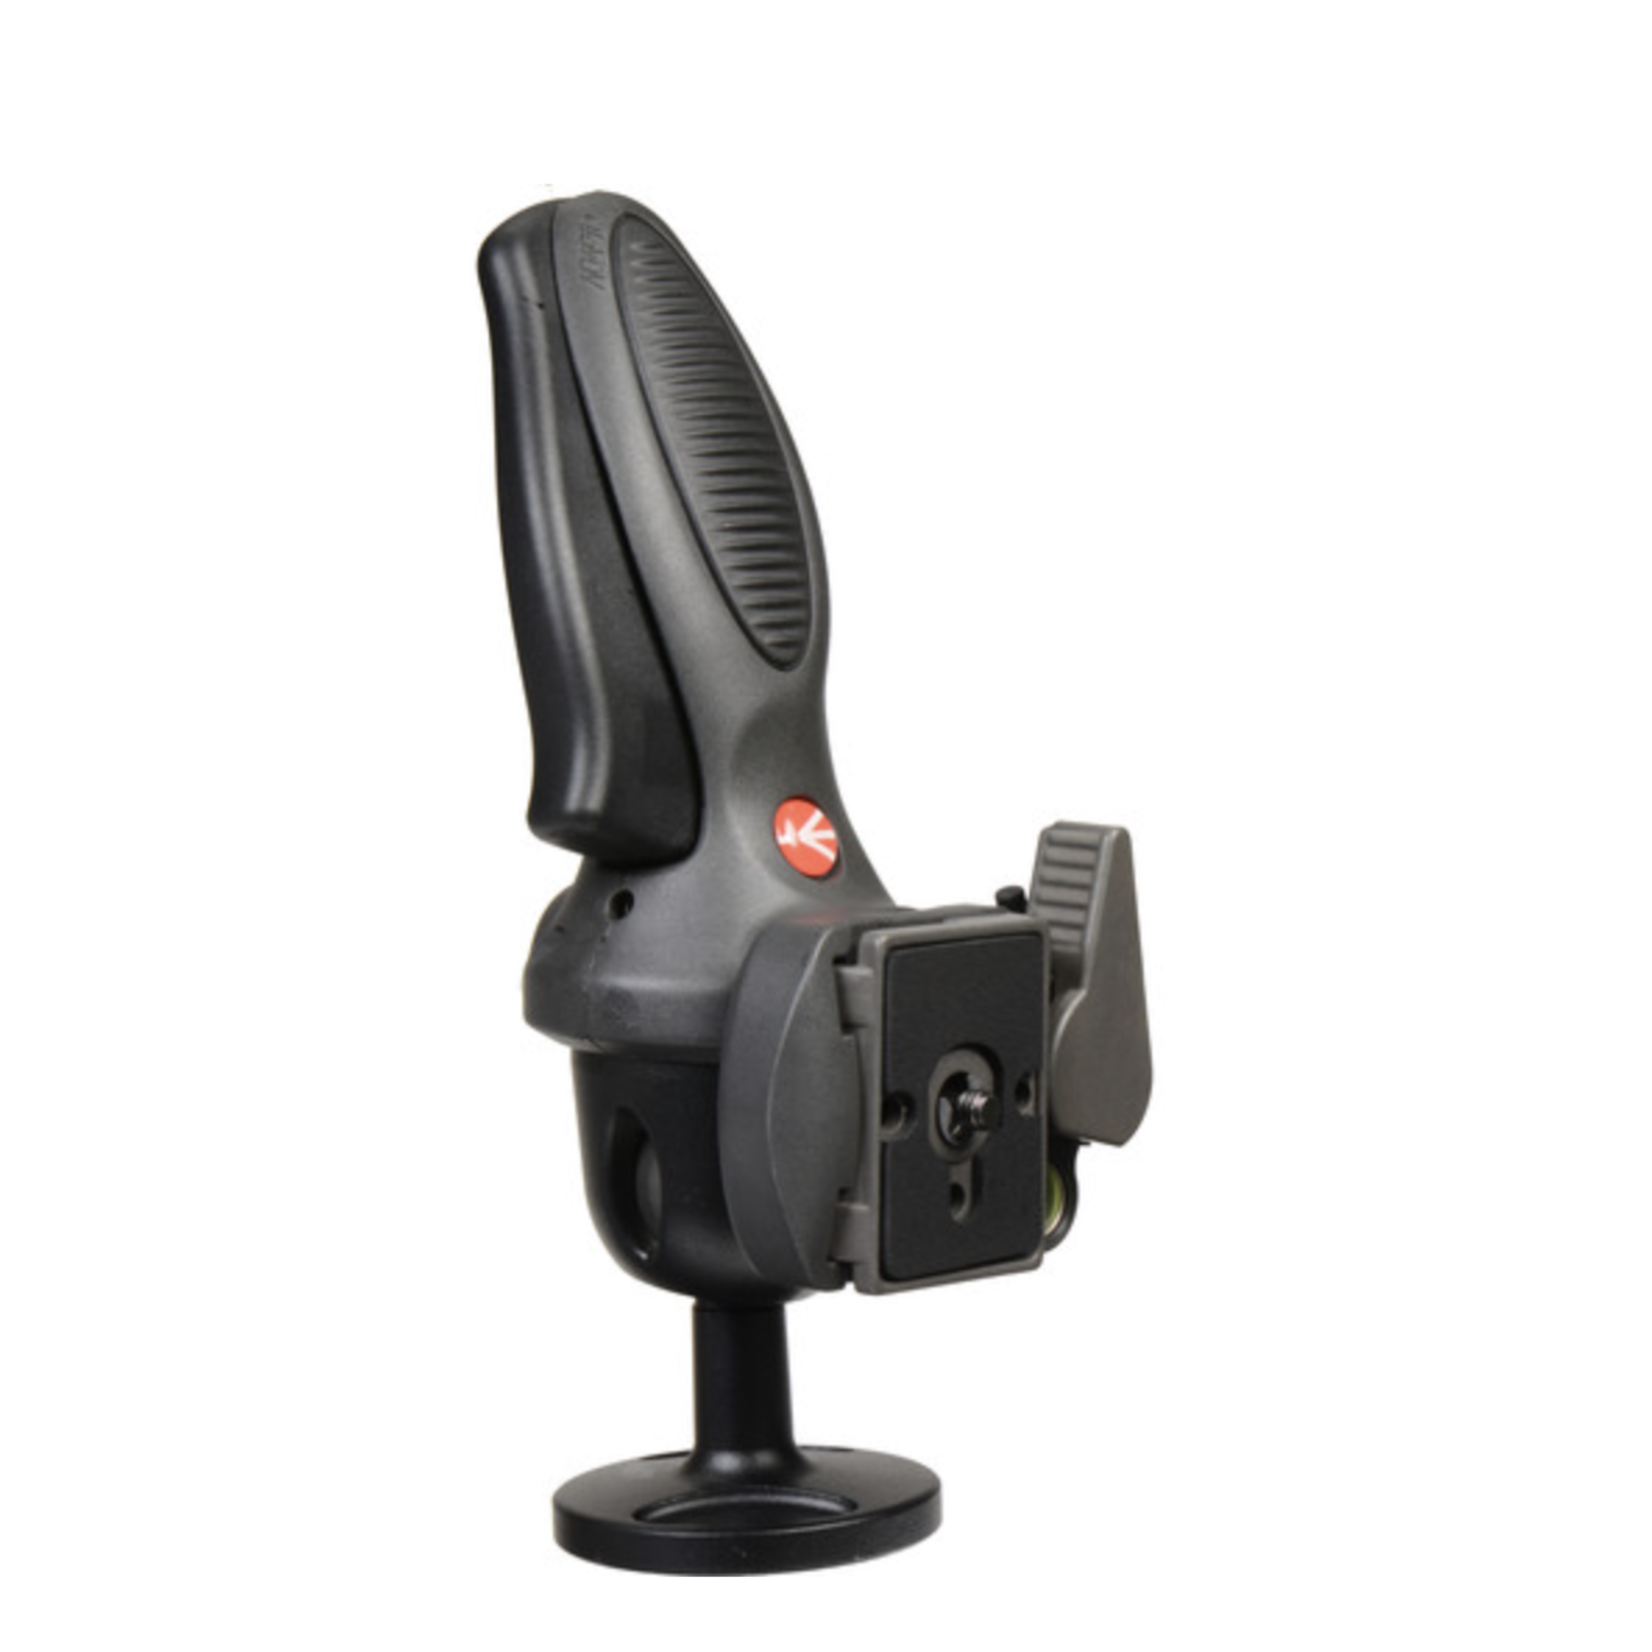 Manfrotto 324RC2 Ball Head with 200PL-14 Quick Release Plate